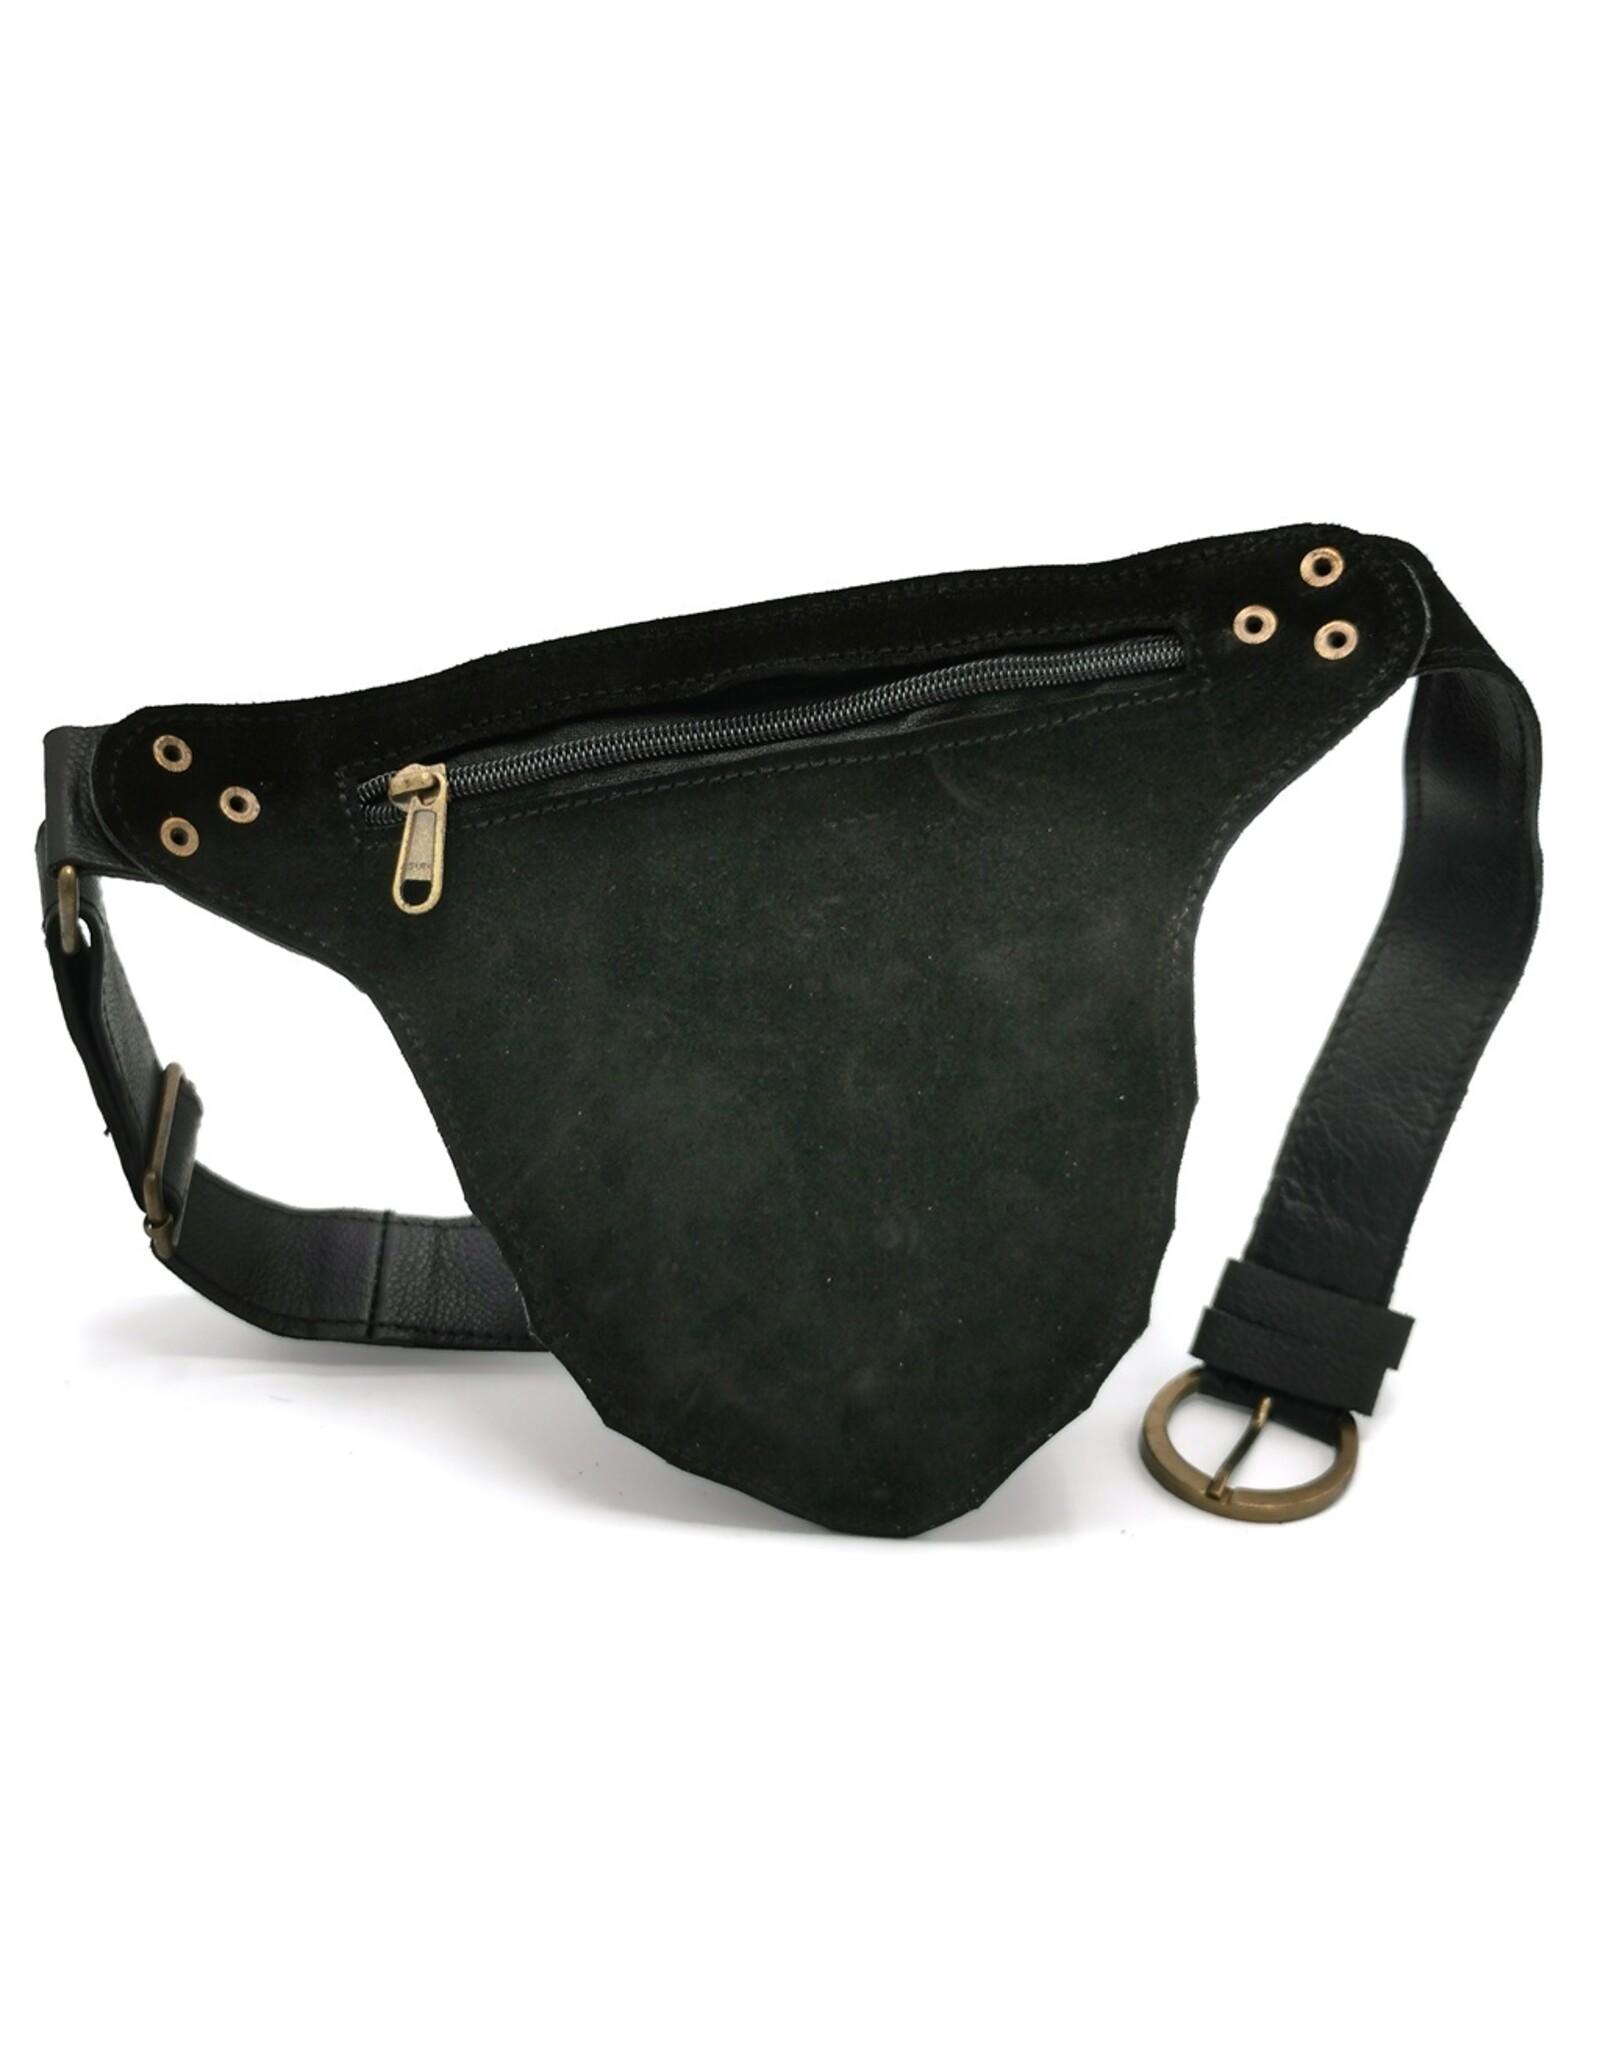 Trukado Leather Festival bags, waist bags and belt bags - Leather Waist bag Ibiza with Vintage hook